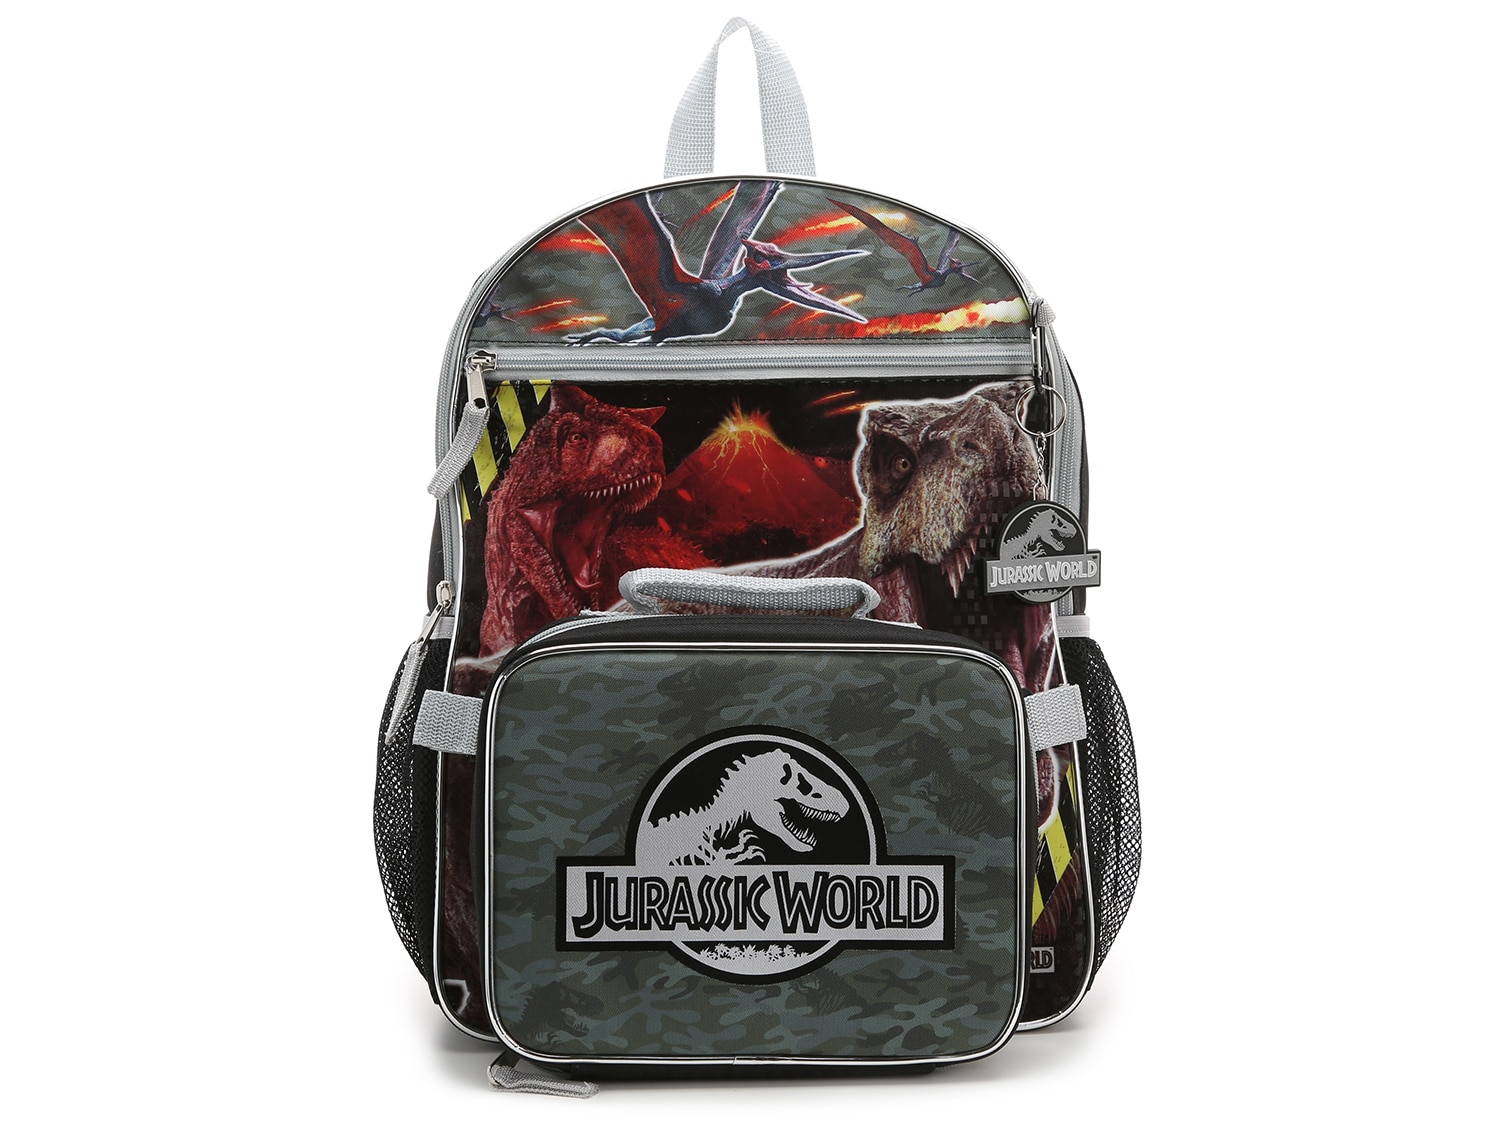 Fast Forward Jurassic World 4-Piece Backpack Set - Free Shipping | DSW